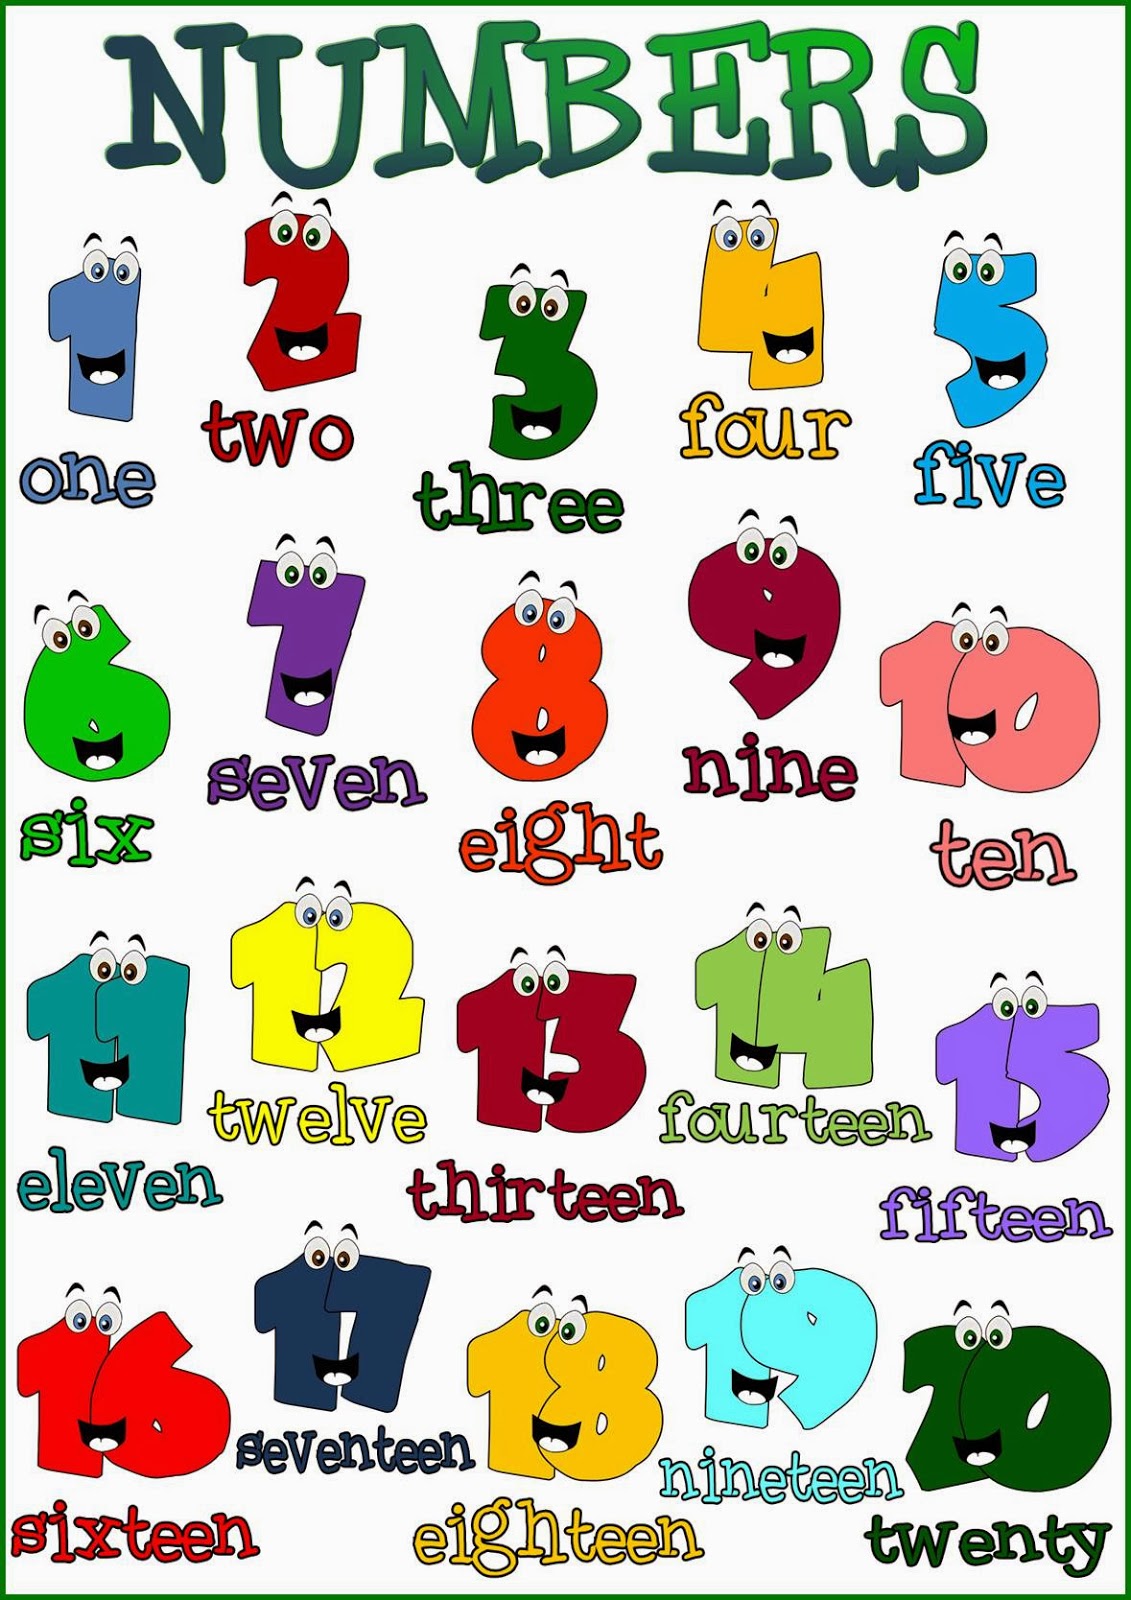 First graders Daoiz: Count from 1 to 20